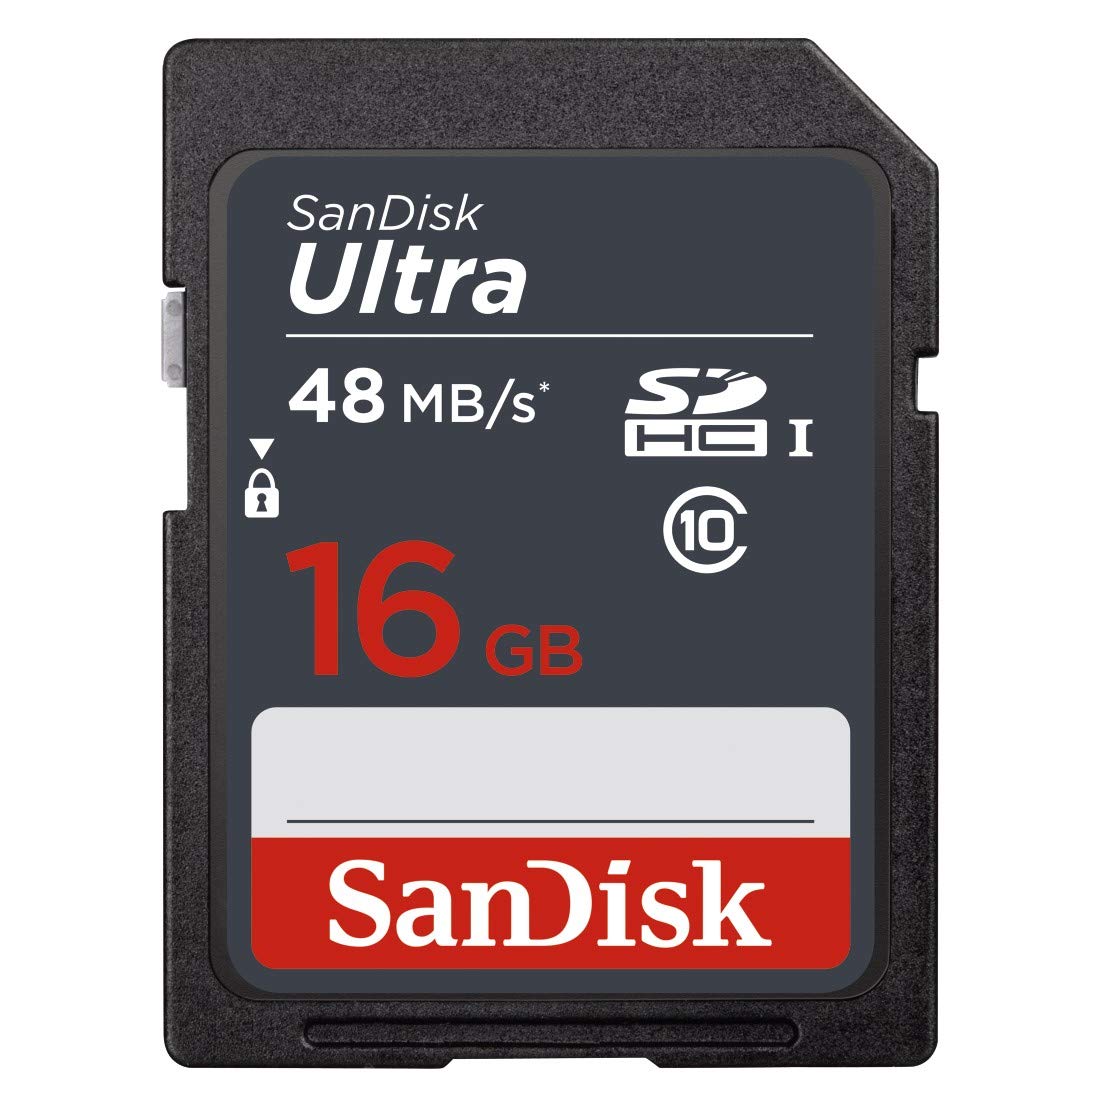 SanDisk Ultra 16GB SDHC UHS-I Class 10 48MB/s Memory Card